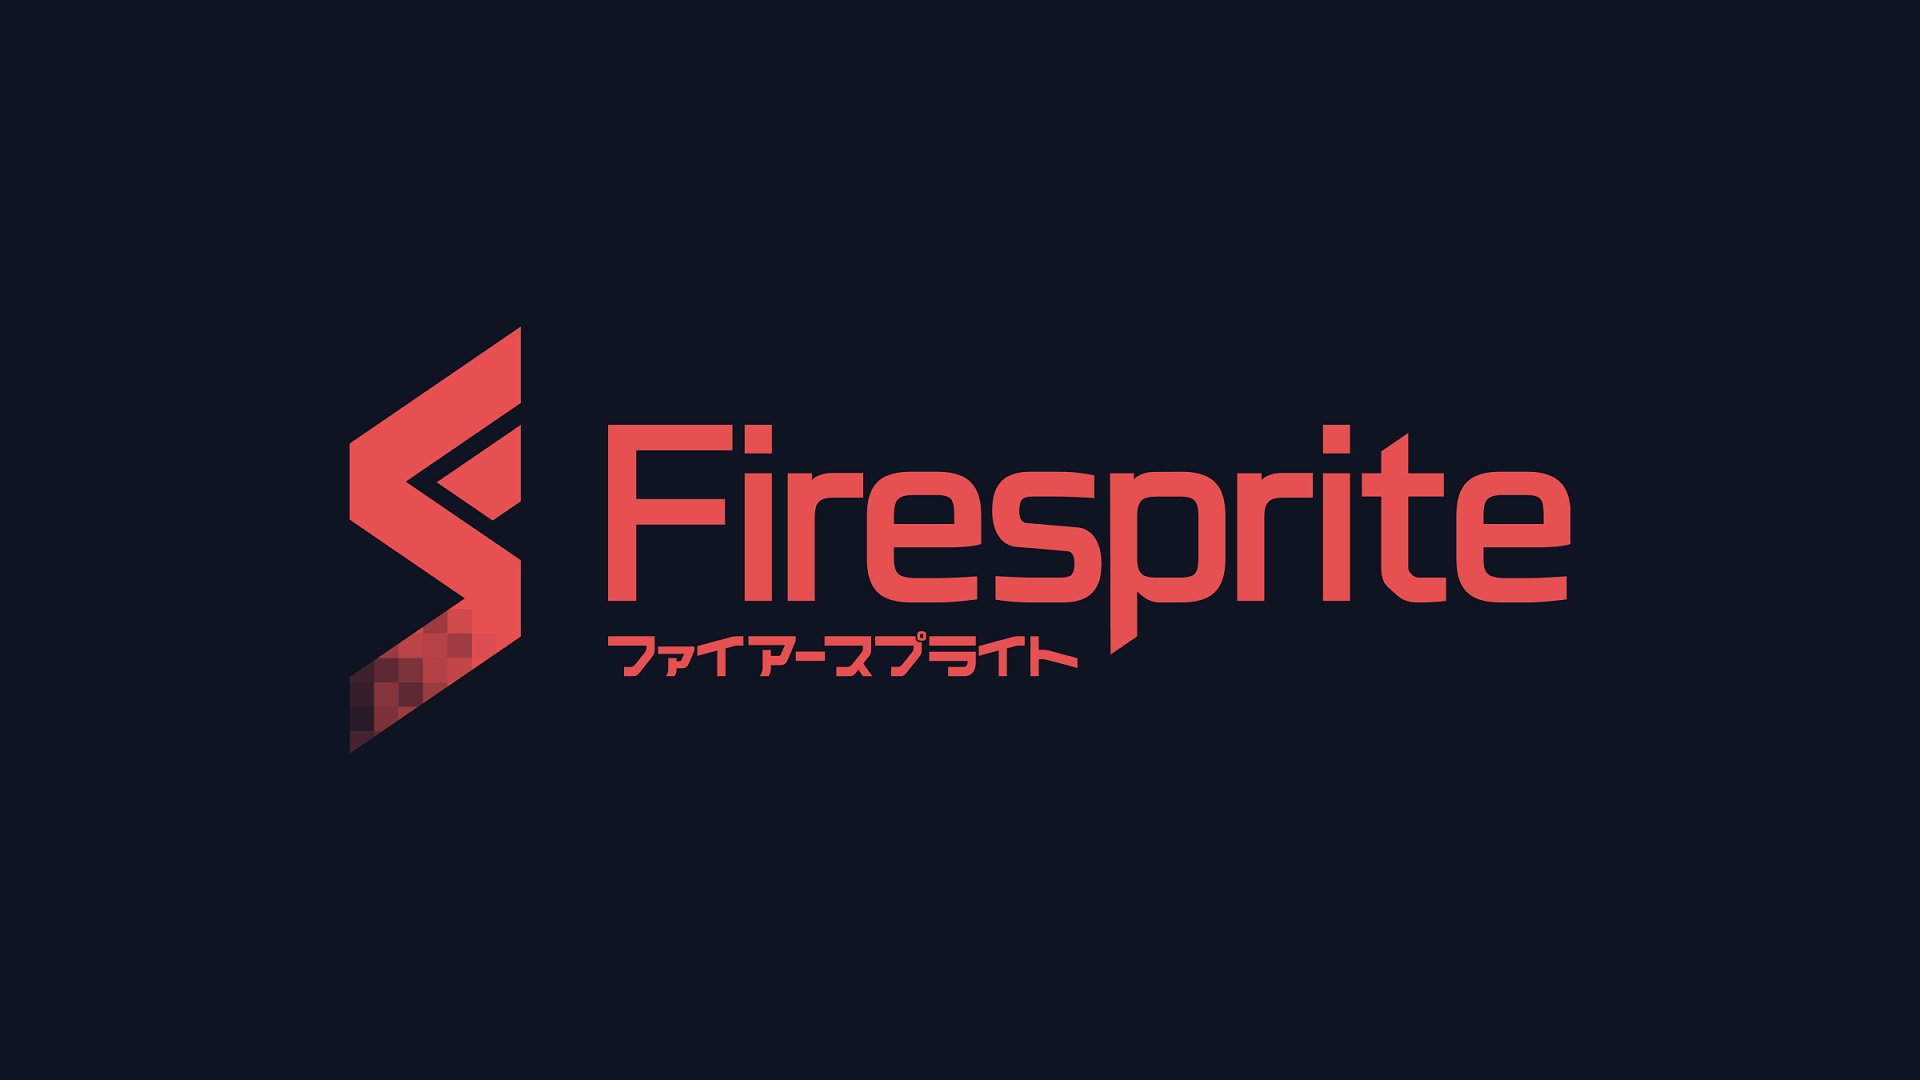 First Party PlayStation Studio Firesprite Intends to Become “a Creative Powerhouse”